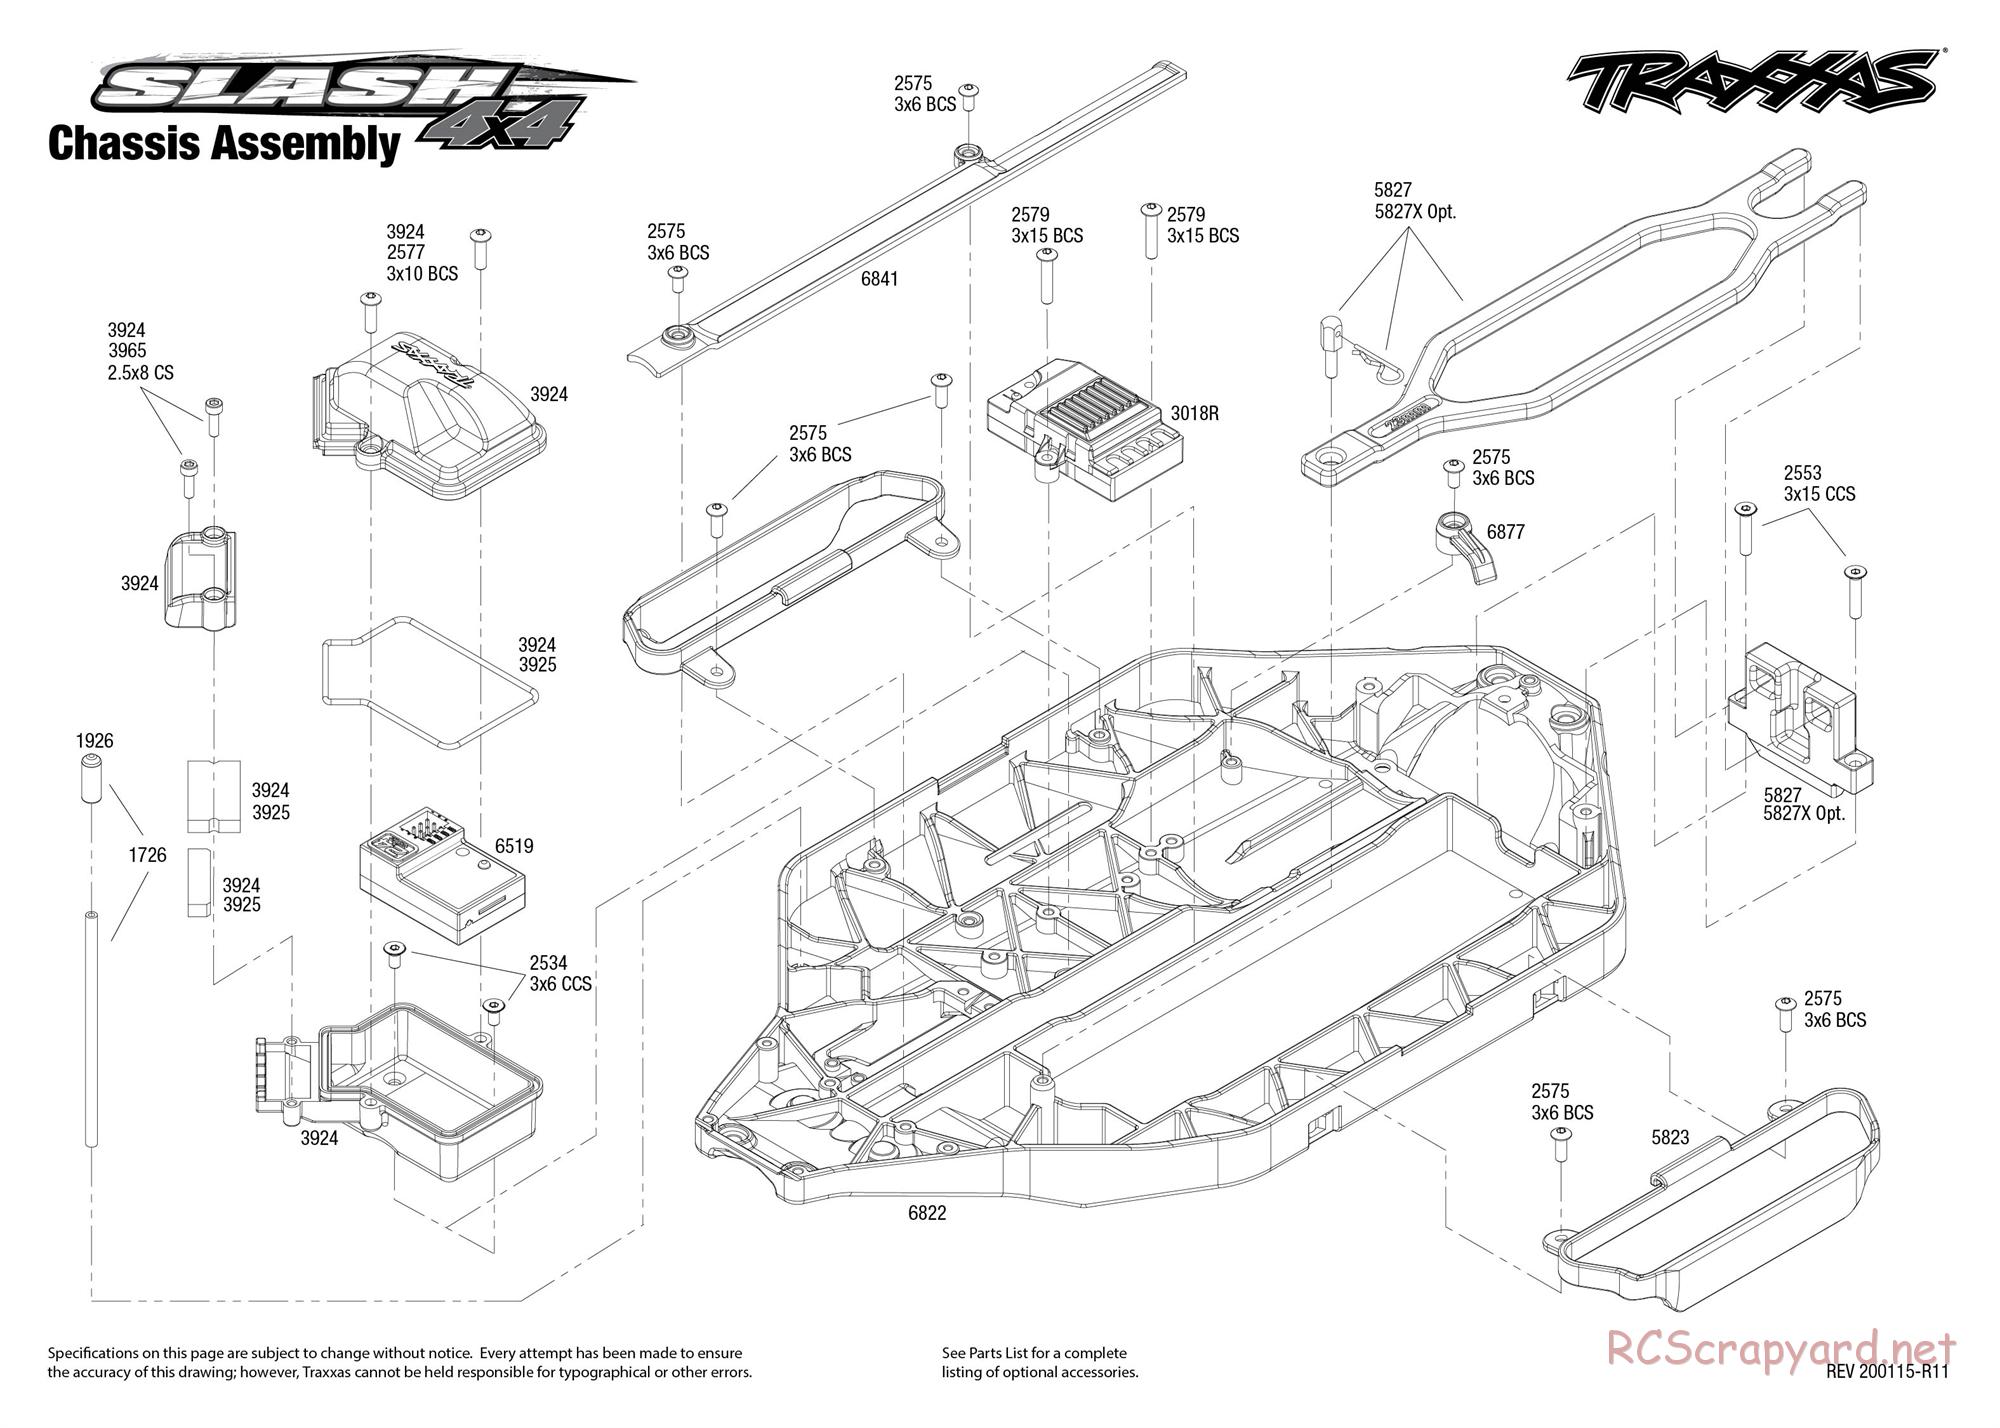 Traxxas - Slash 4x4 Brushed (2018) - Exploded Views - Page 1